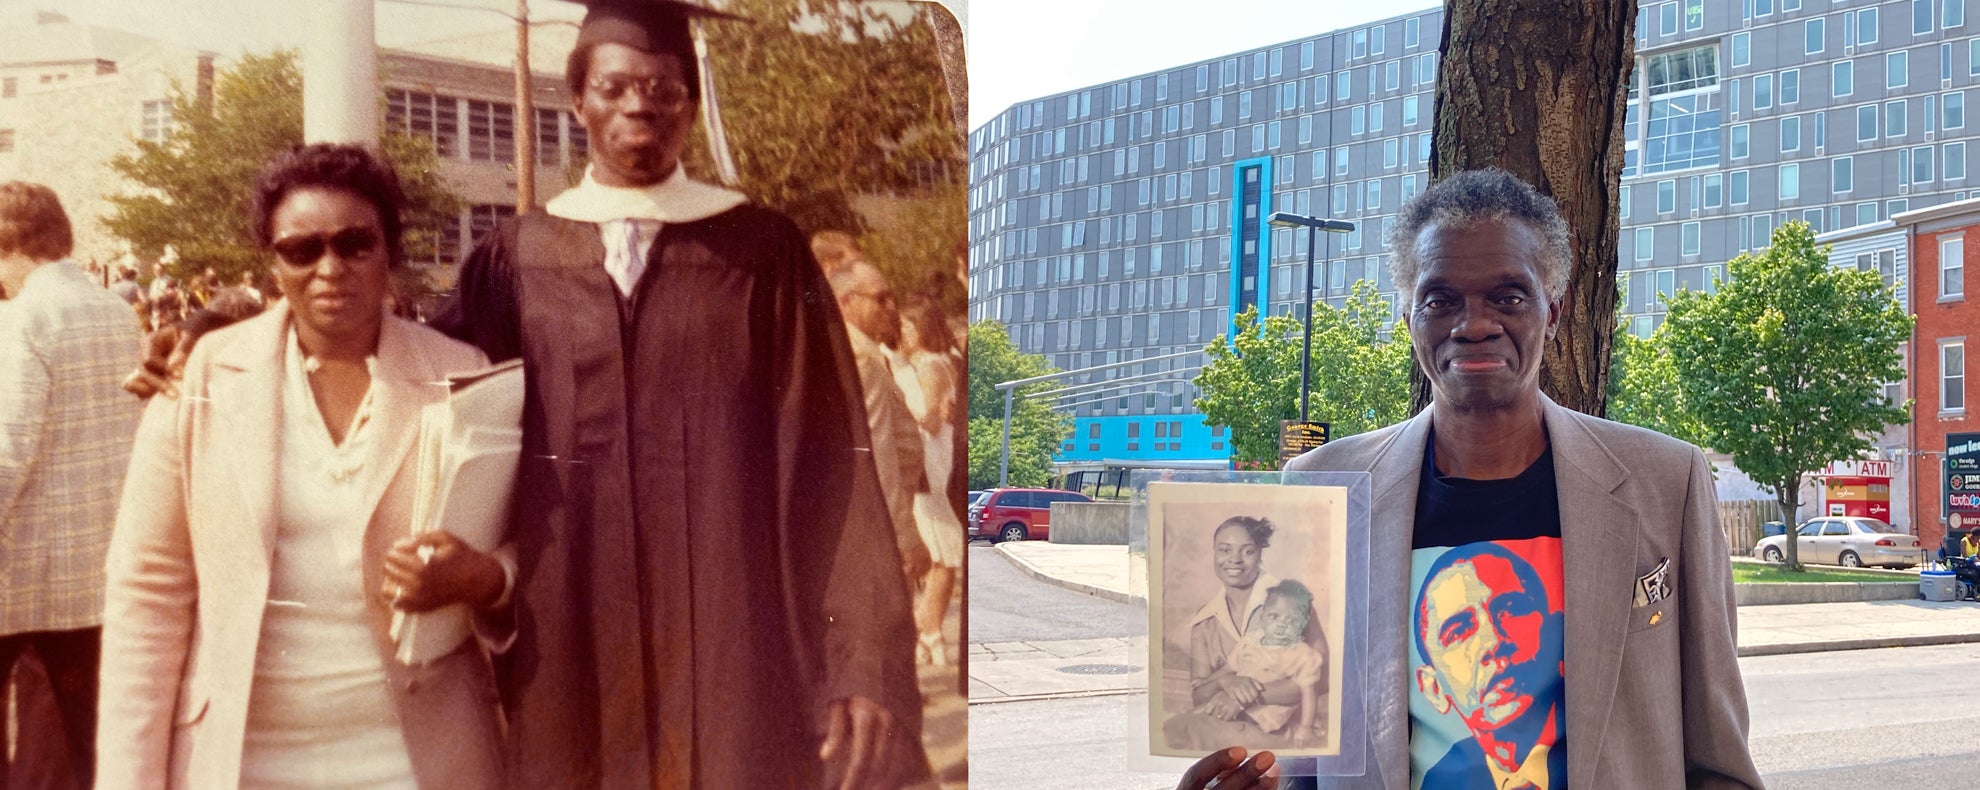 Left image: Bruce Wiley and his mother Voleta McNair, right image: Bruce Wiley holding an old photograph of his mom holding him as a toddler